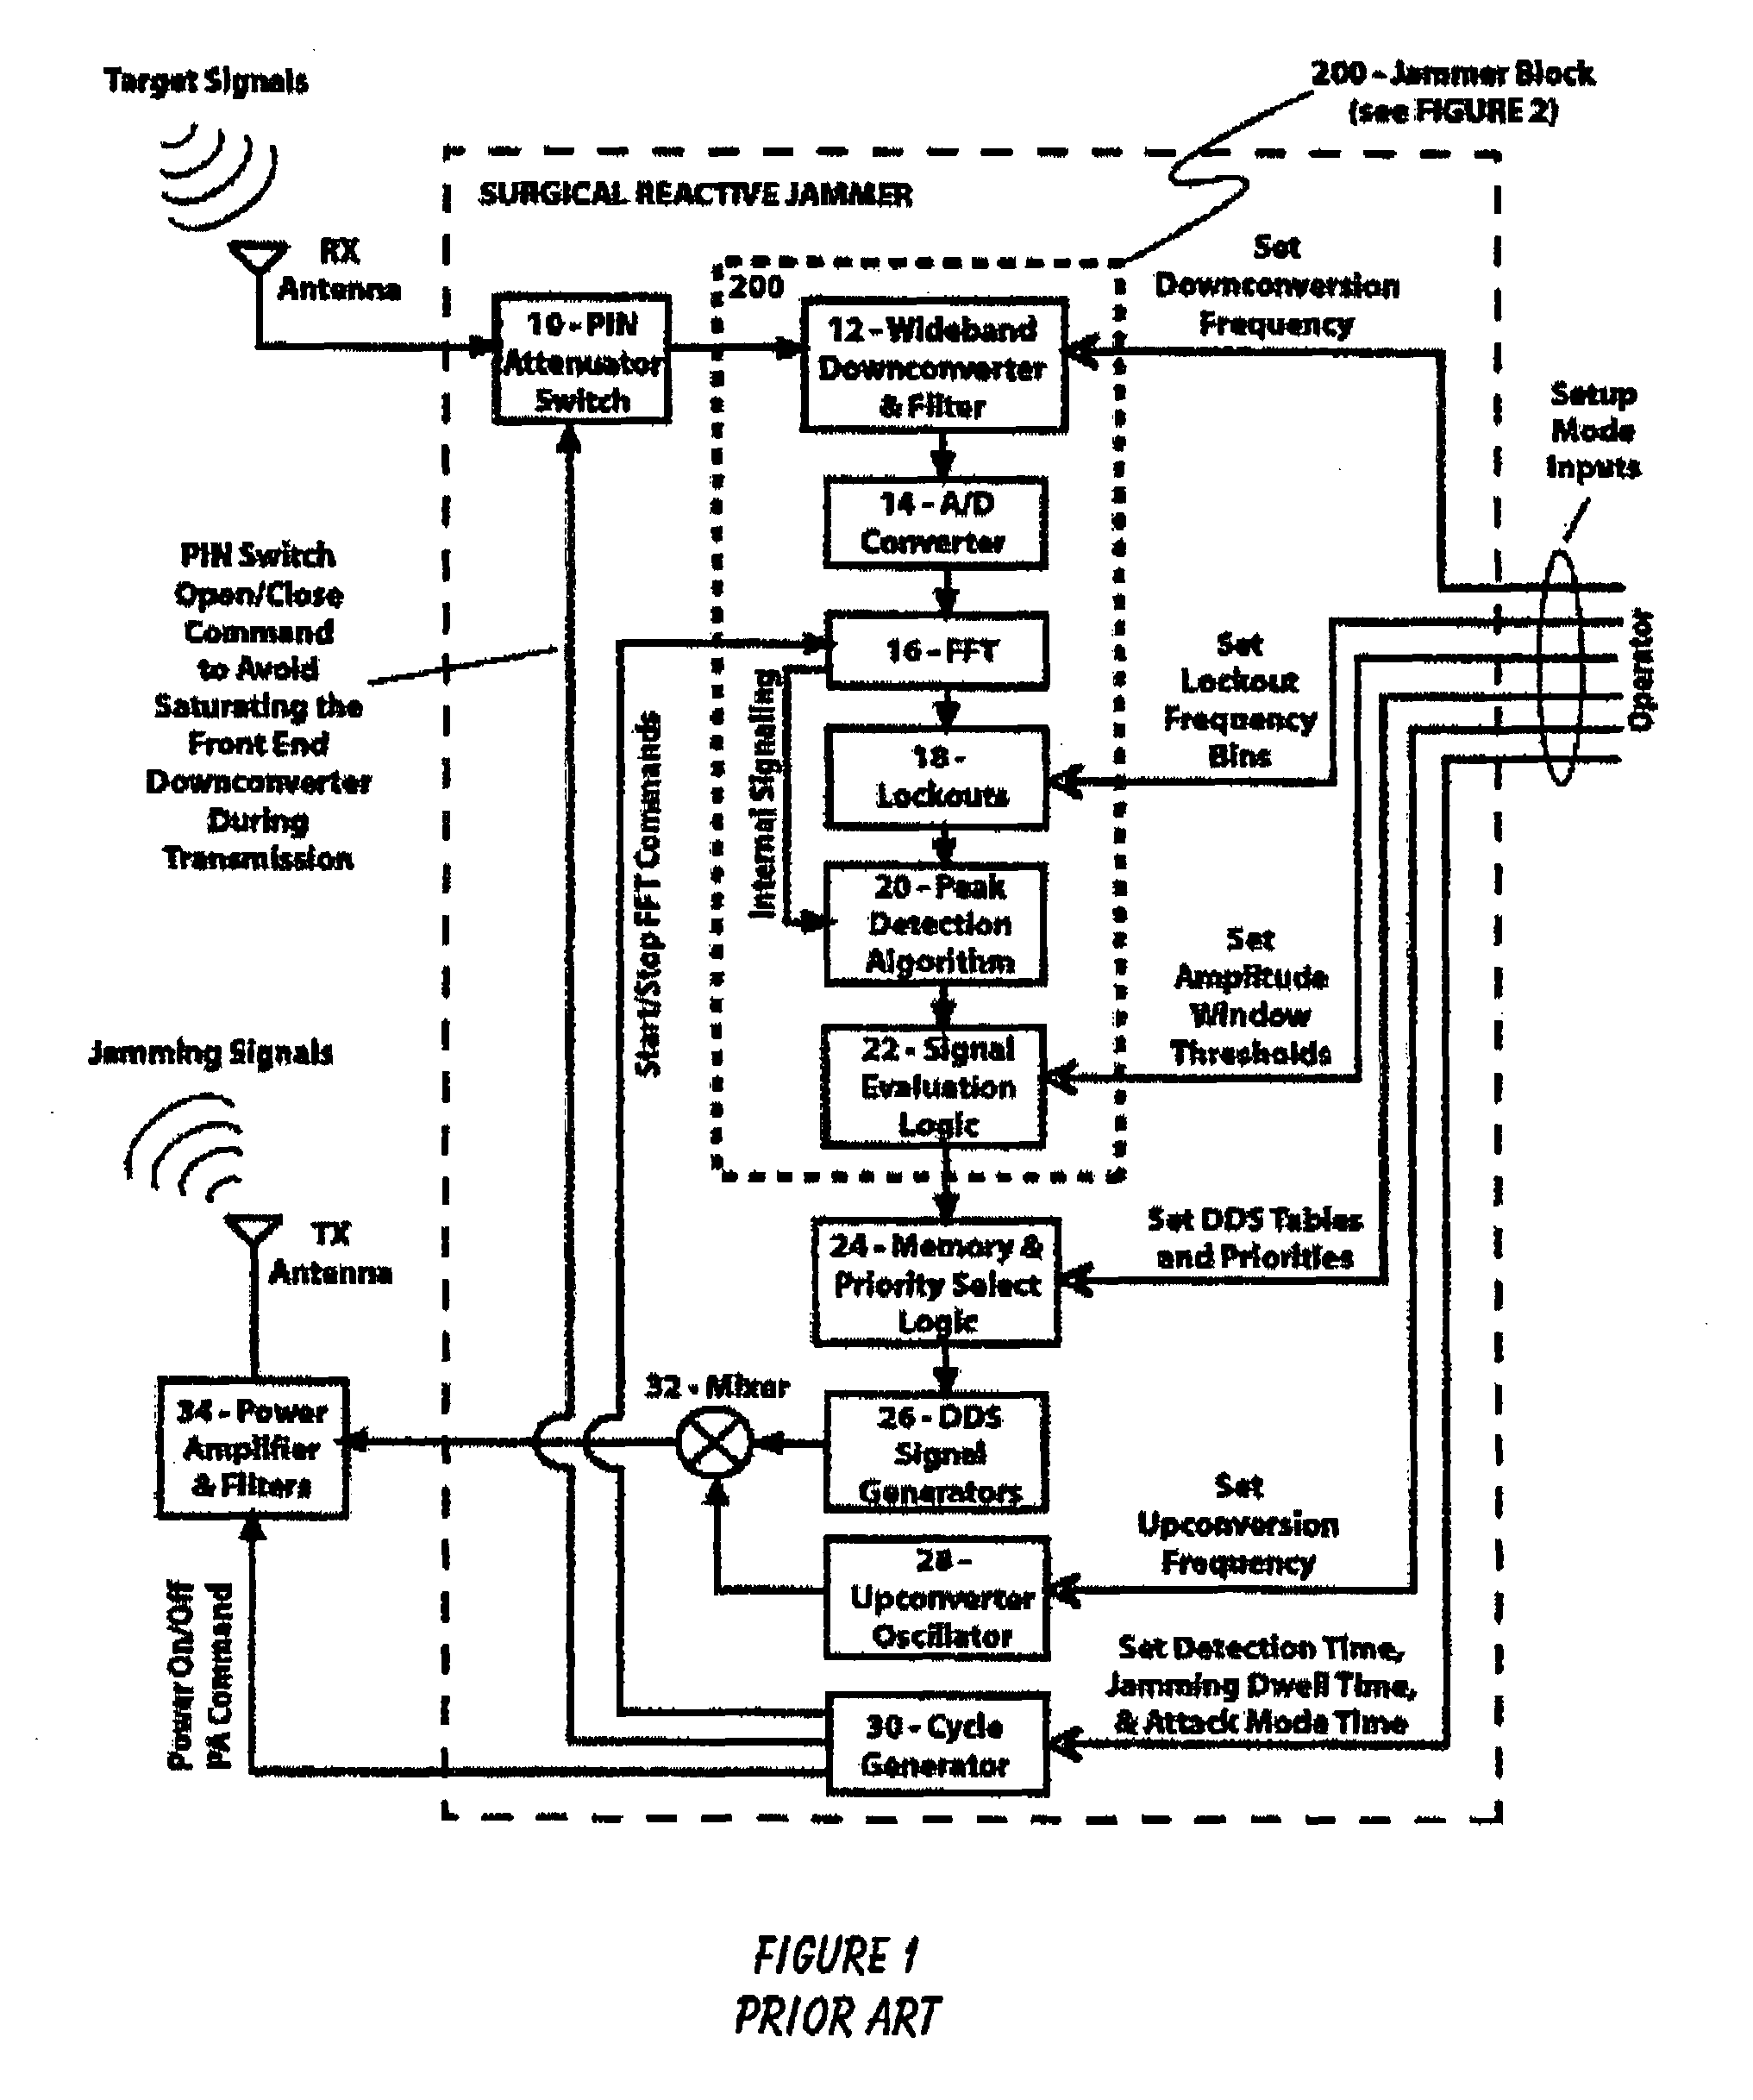 Method and apparatus to perform reactive jamming while simultaneously avoiding friendly pseudo-random frequency hopping communications